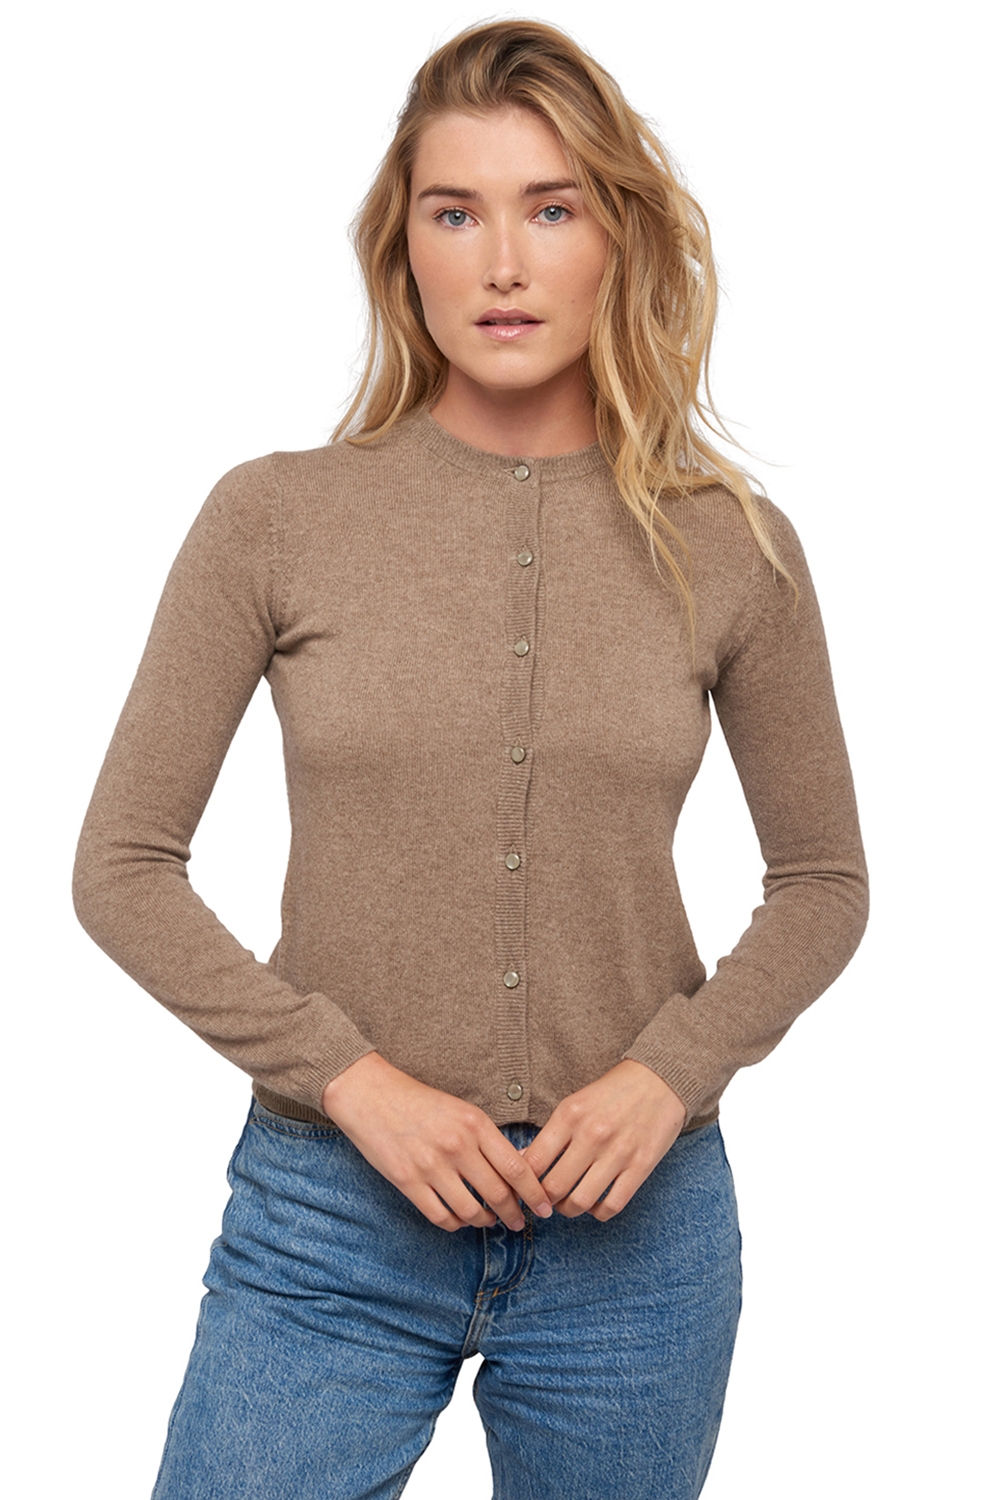 Cachemire pull femme collection printemps ete chloe natural brown xl